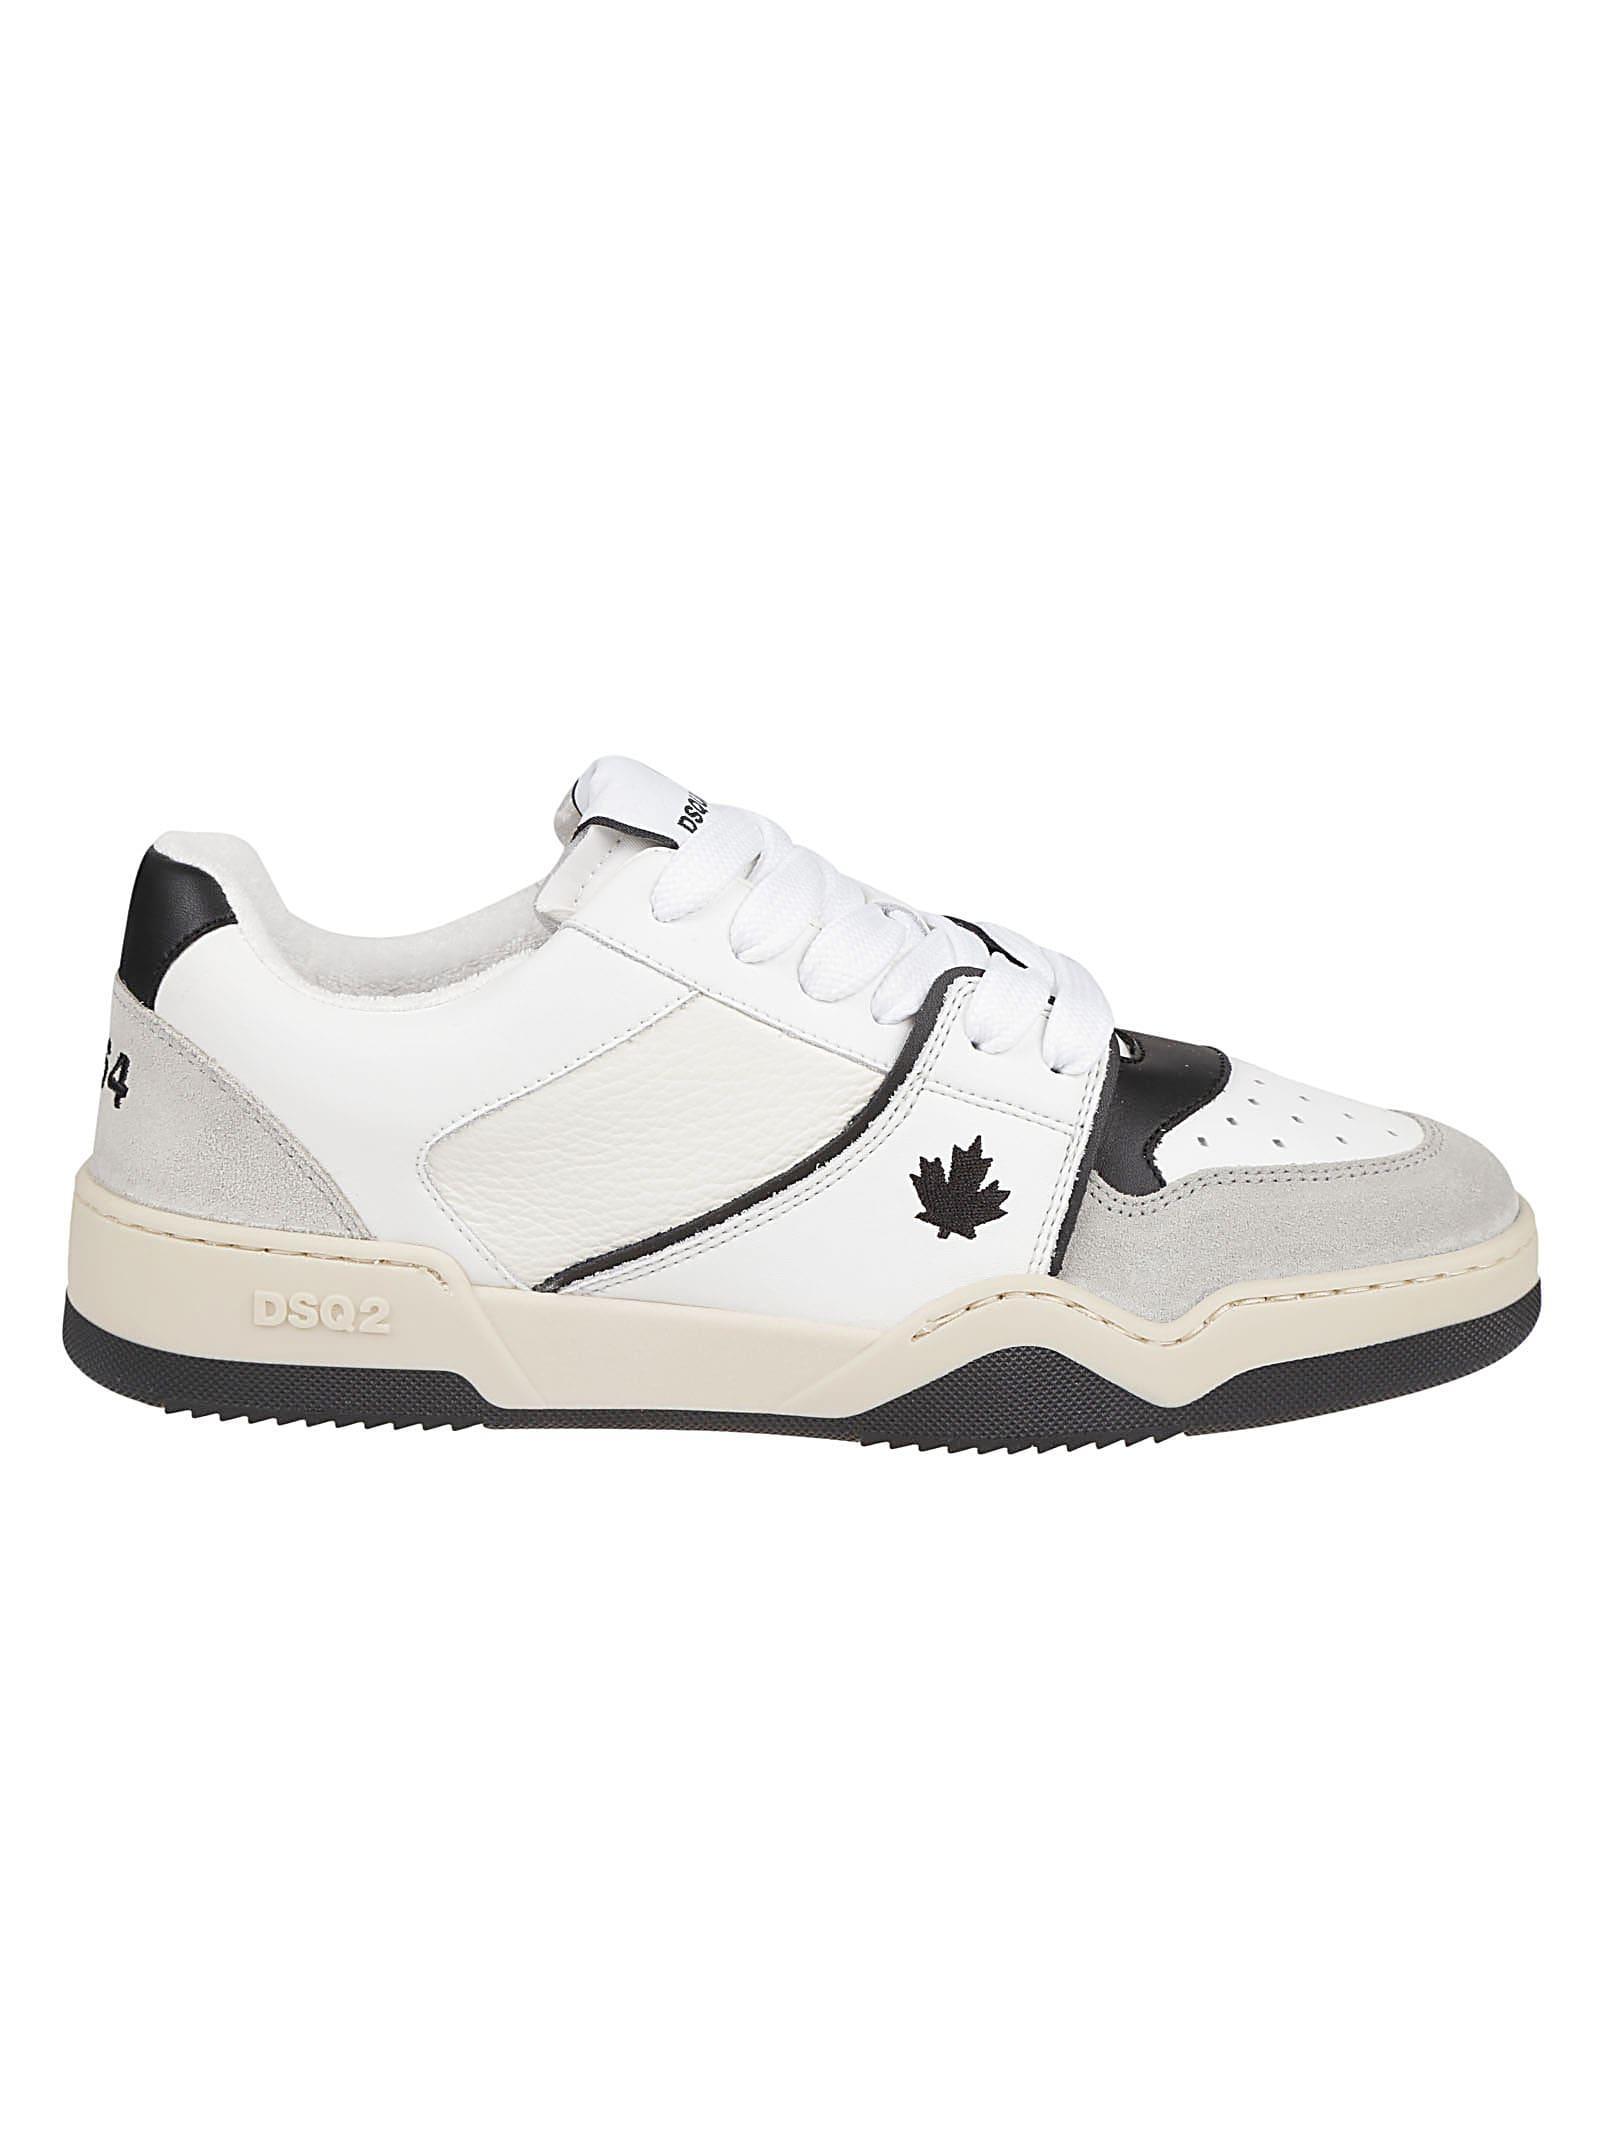 DSquared² Spiker Lace-up Low Top Sneakers in White for Men | Lyst